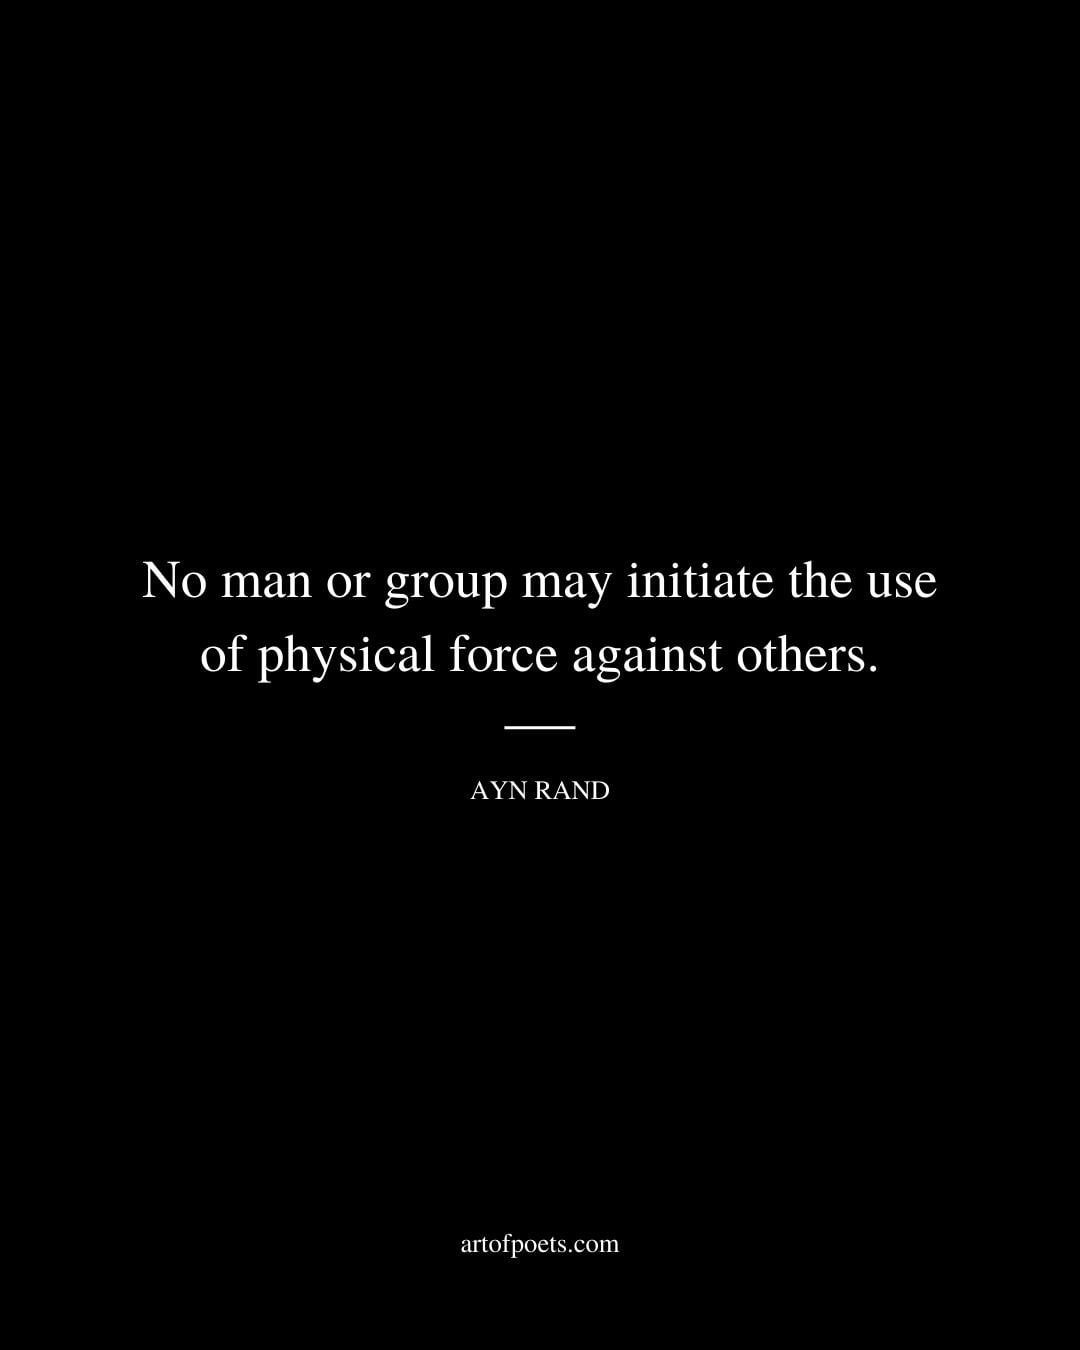 No man or group may initiate the use of physical force against others